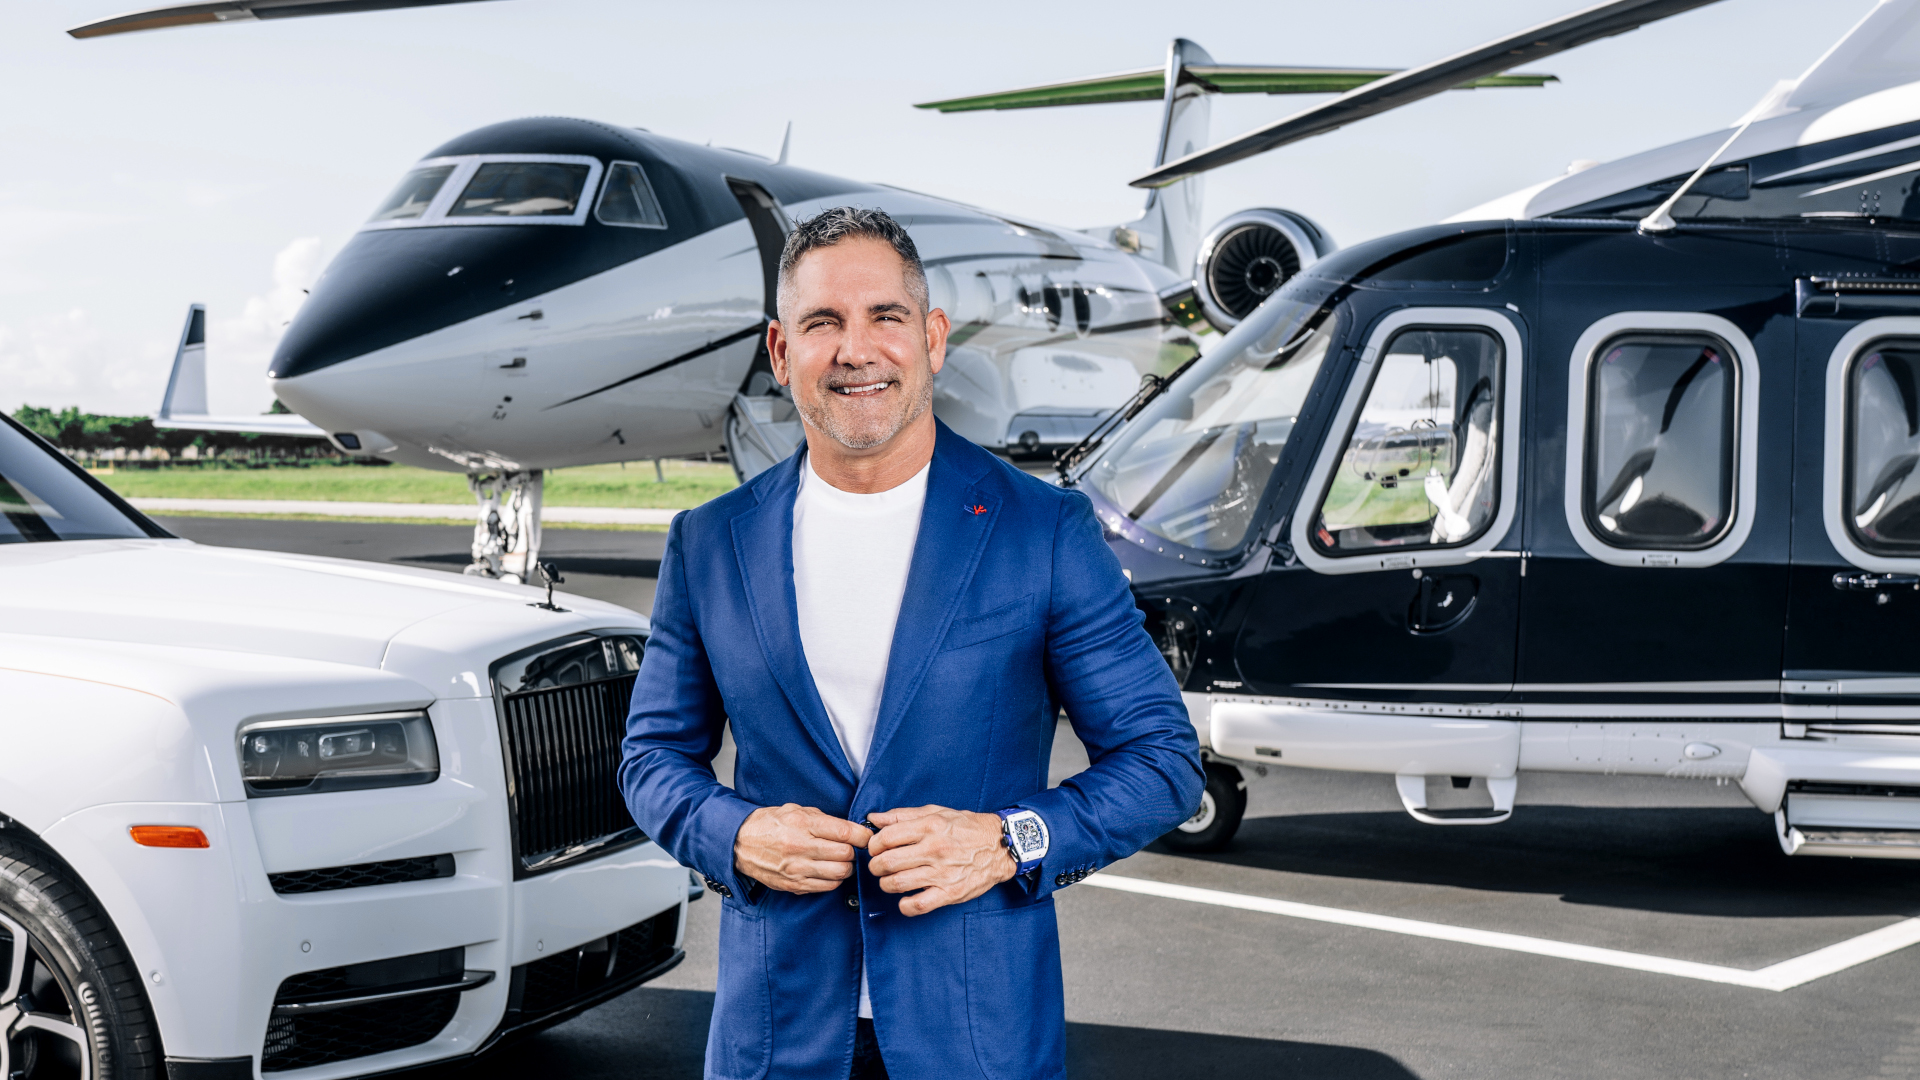 Grant Cardone's Net Worth: How He Achieved Wealth Through Real Estate